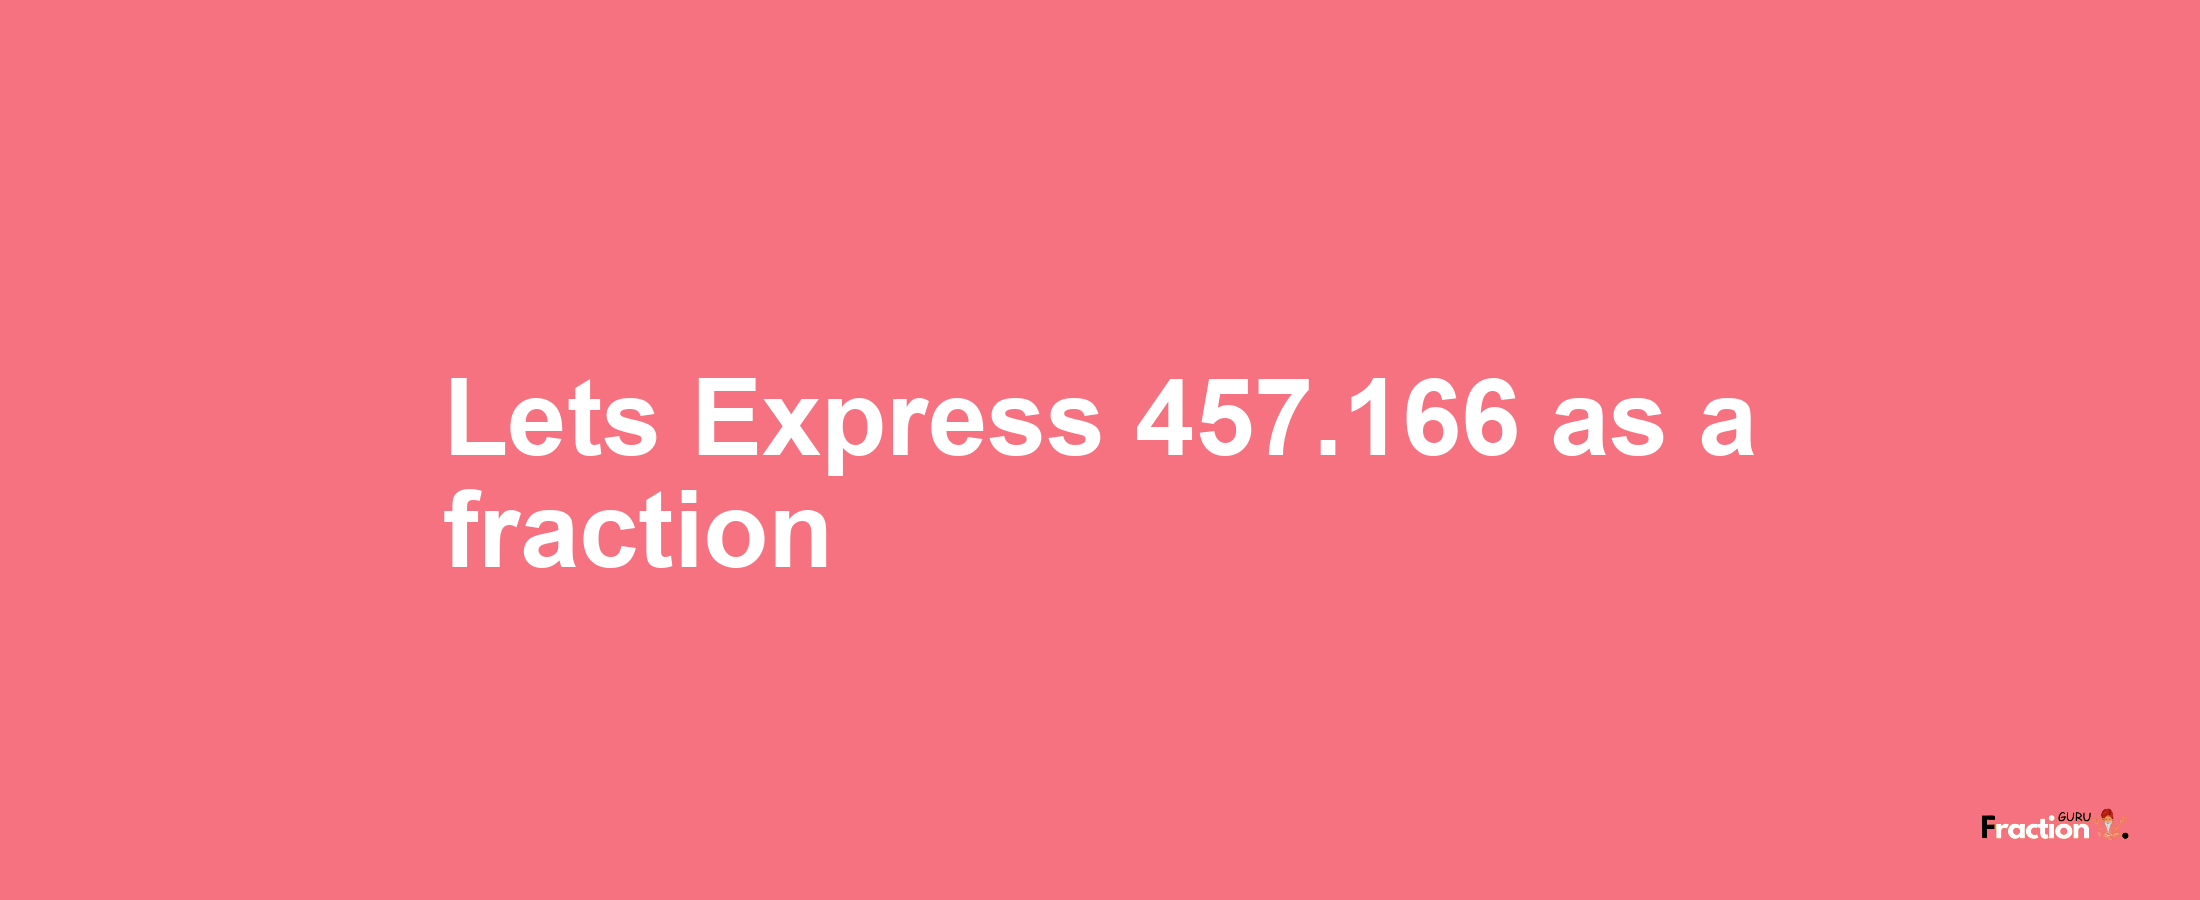 Lets Express 457.166 as afraction